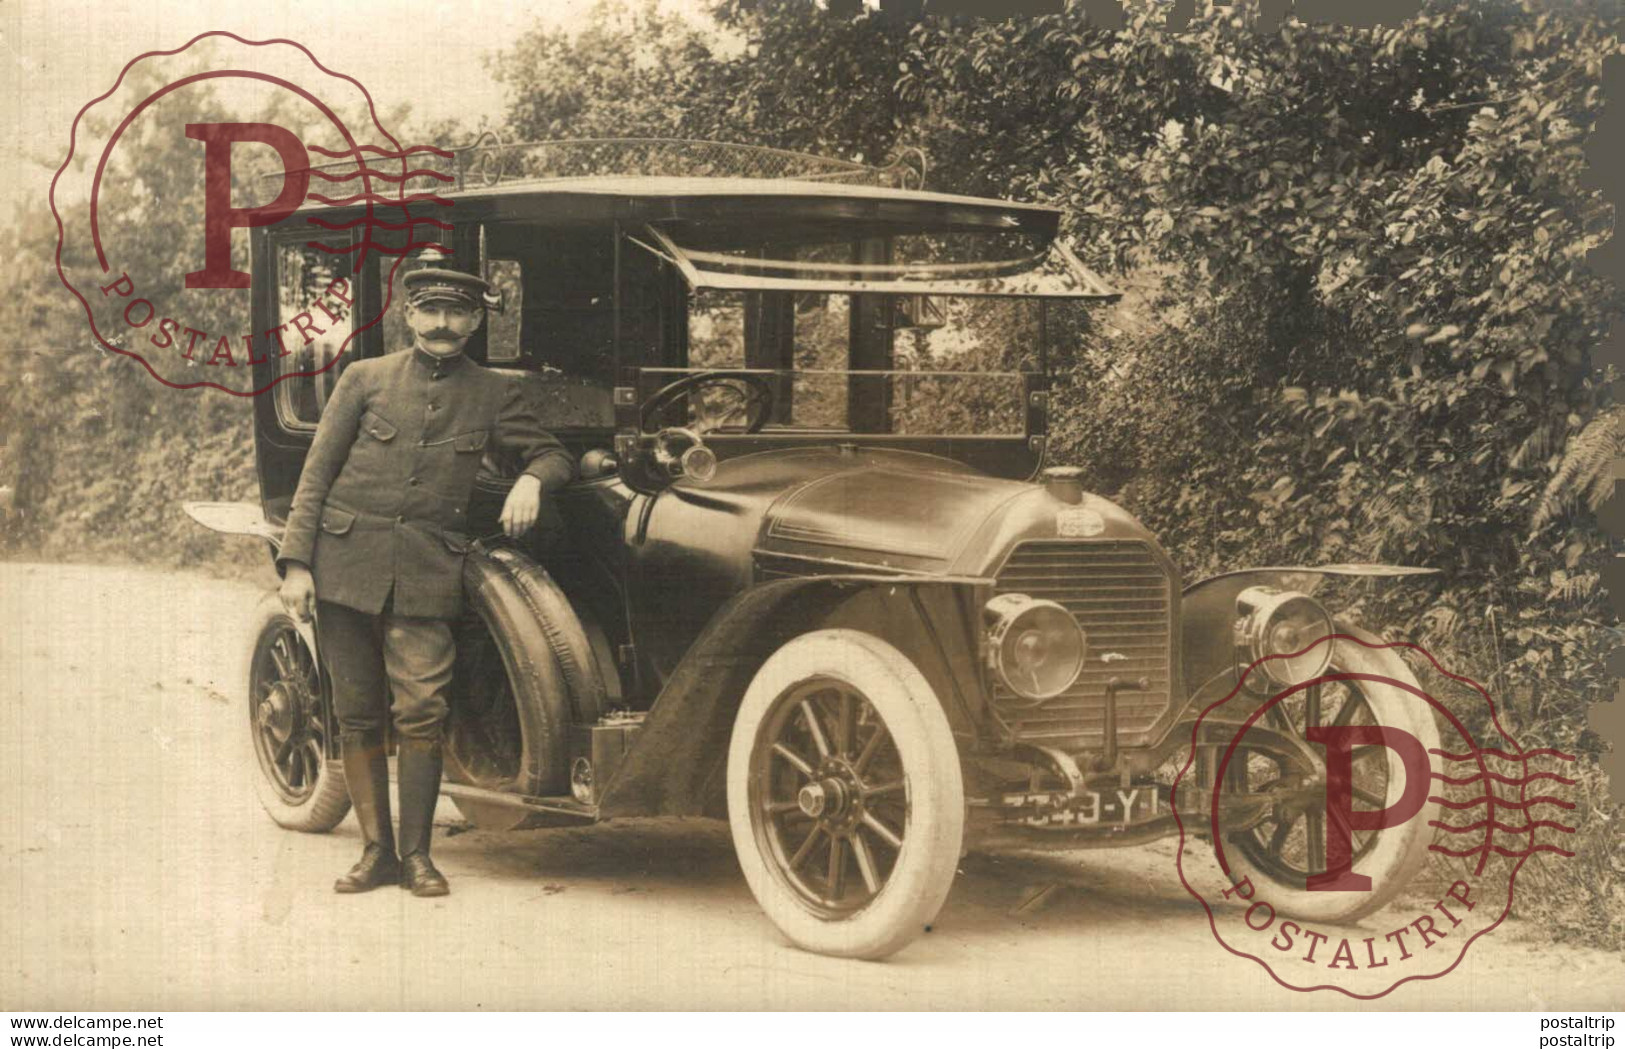 PEUGEOT TAXI  CARTE PHOTO RPPC LITTLE DAMAGE ON THE BACK NOT THE PHOTO   The Bryan Goodman Collection - Taxis & Fiacres